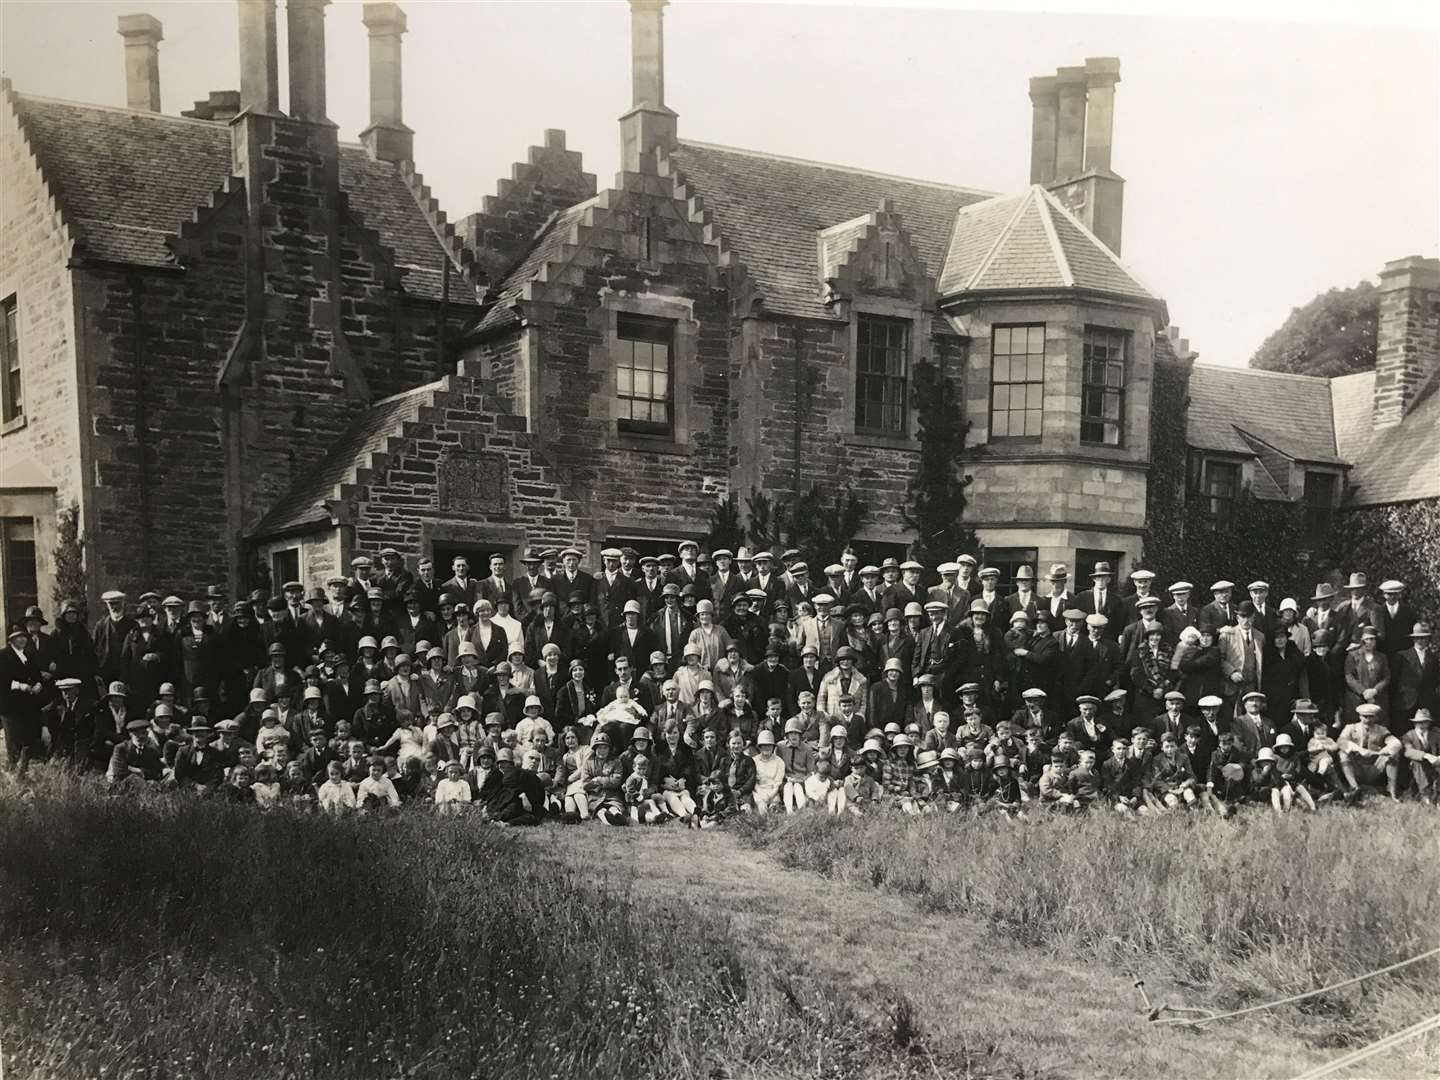 Staff and families at Barrock House, Lyth, taken during a summer in the 1930s. Picture submitted by Louise Scott, Barrock House